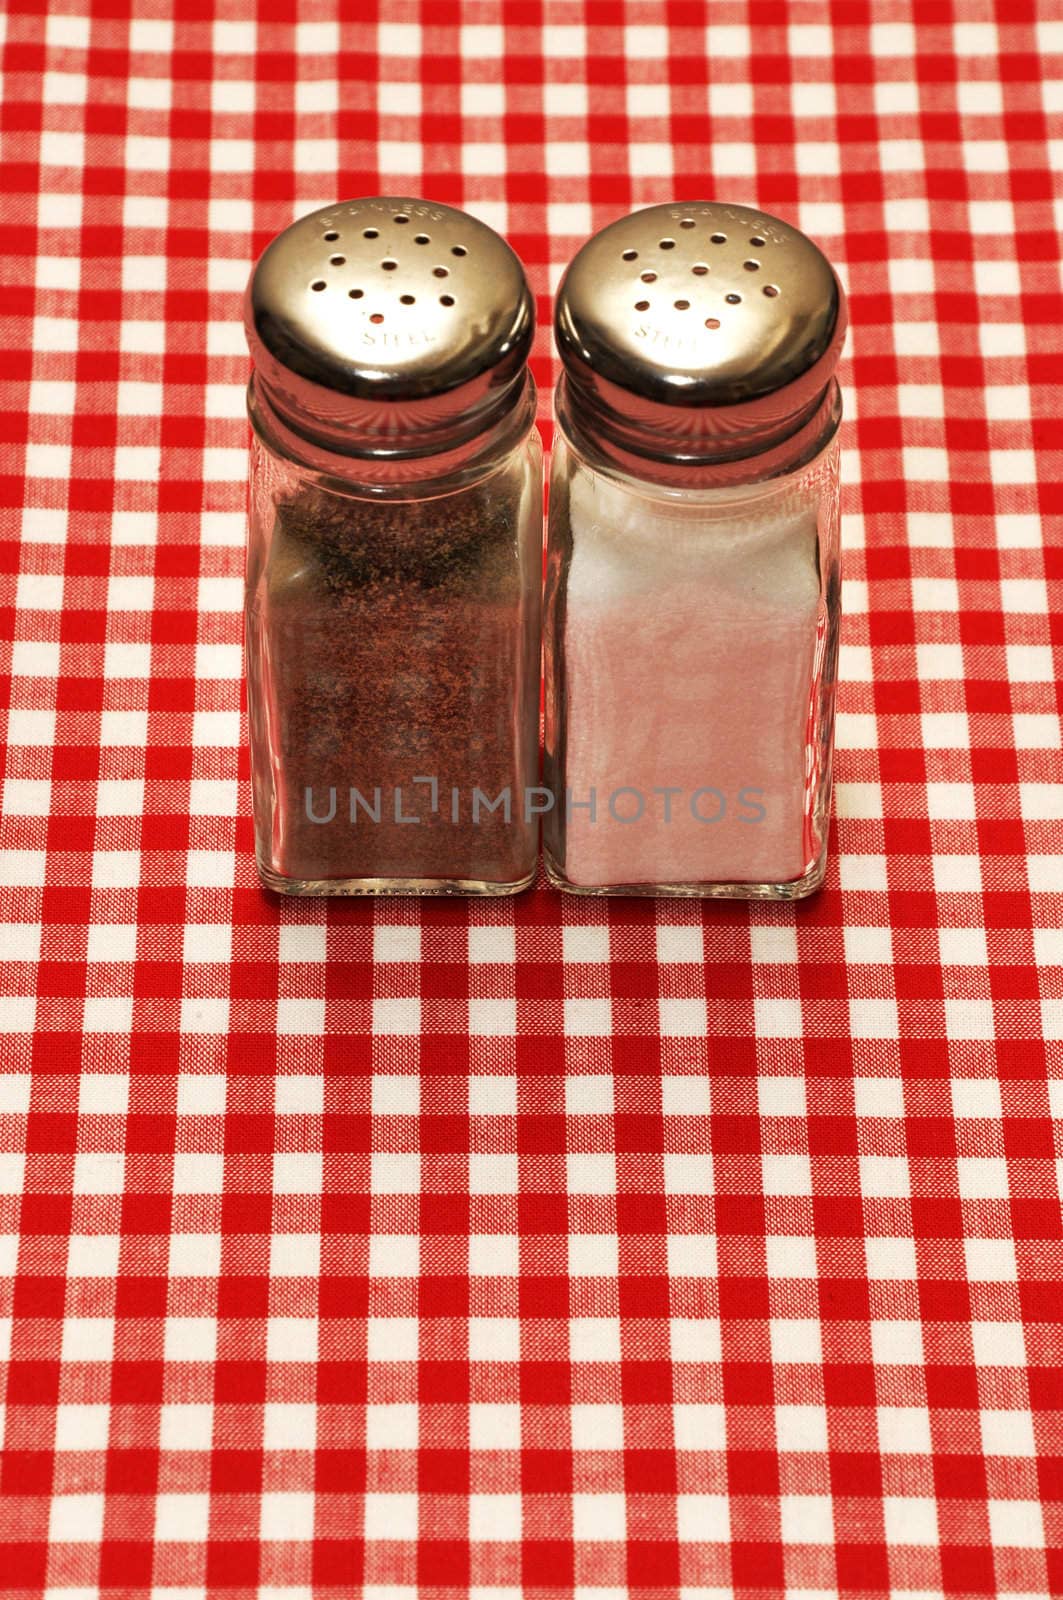 Salt and pepper shakers on red gingham tablecloth.